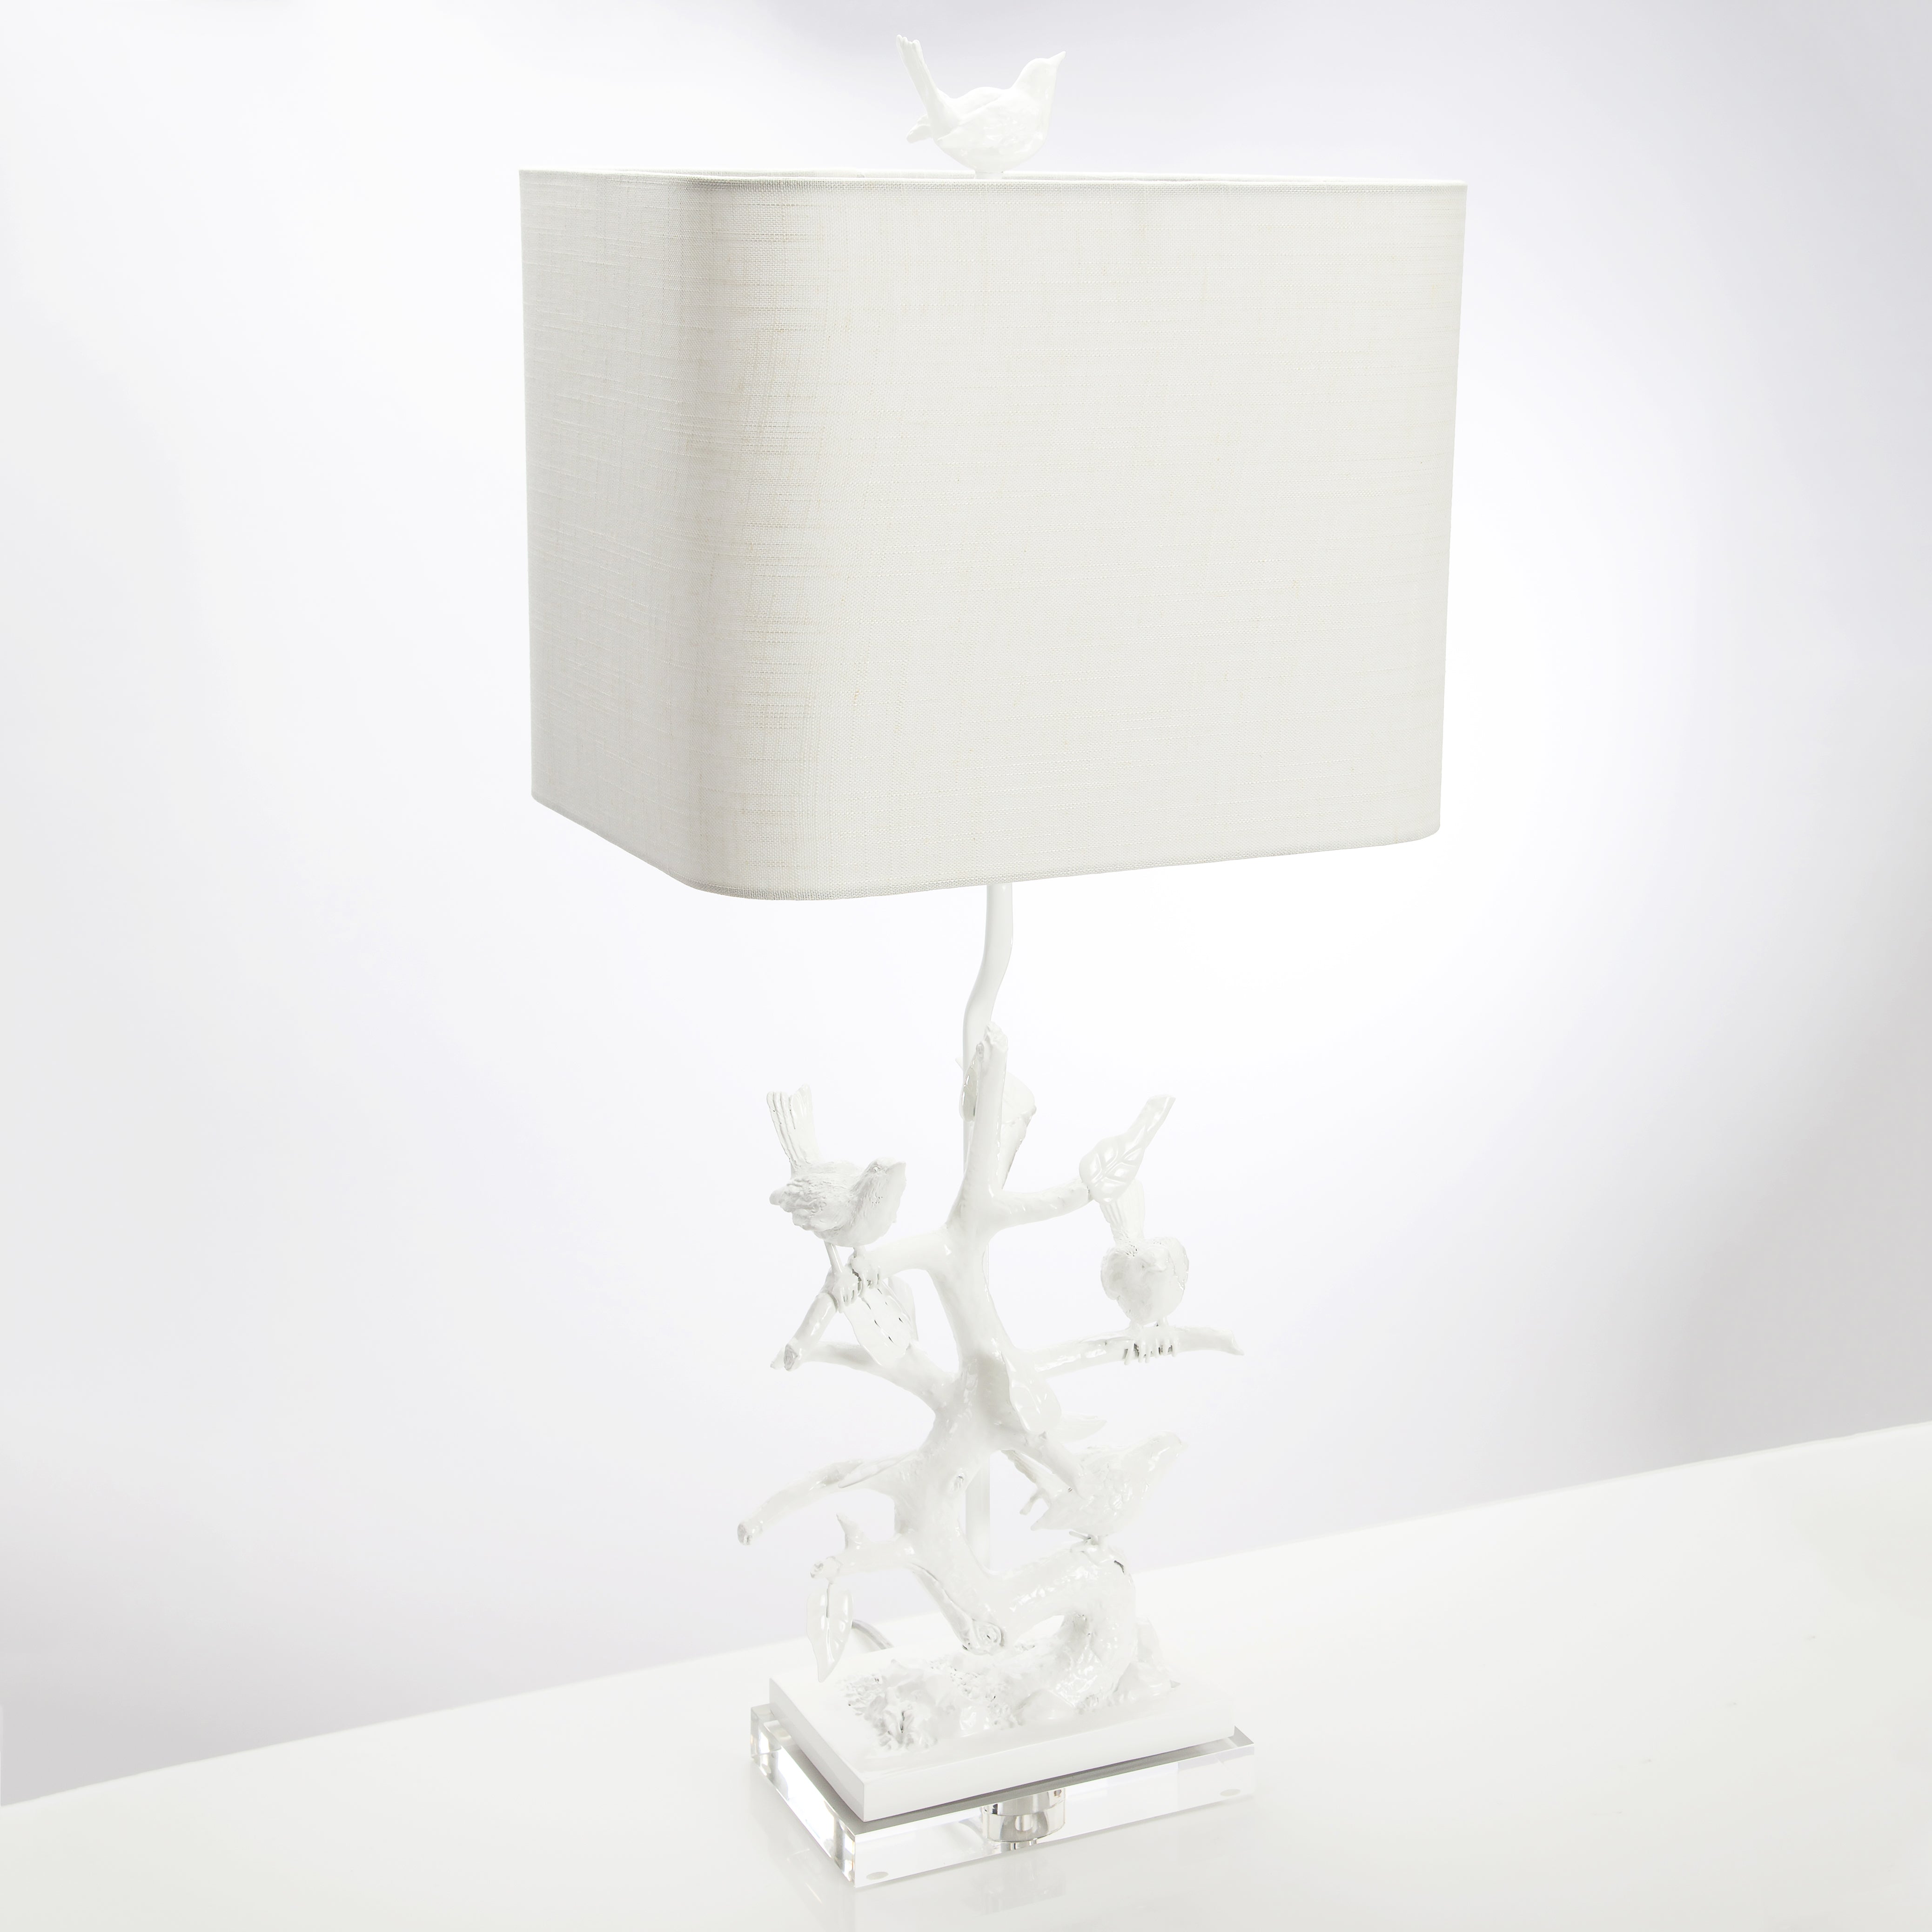 Bird on Branch Table Lamp - Couture Lamps